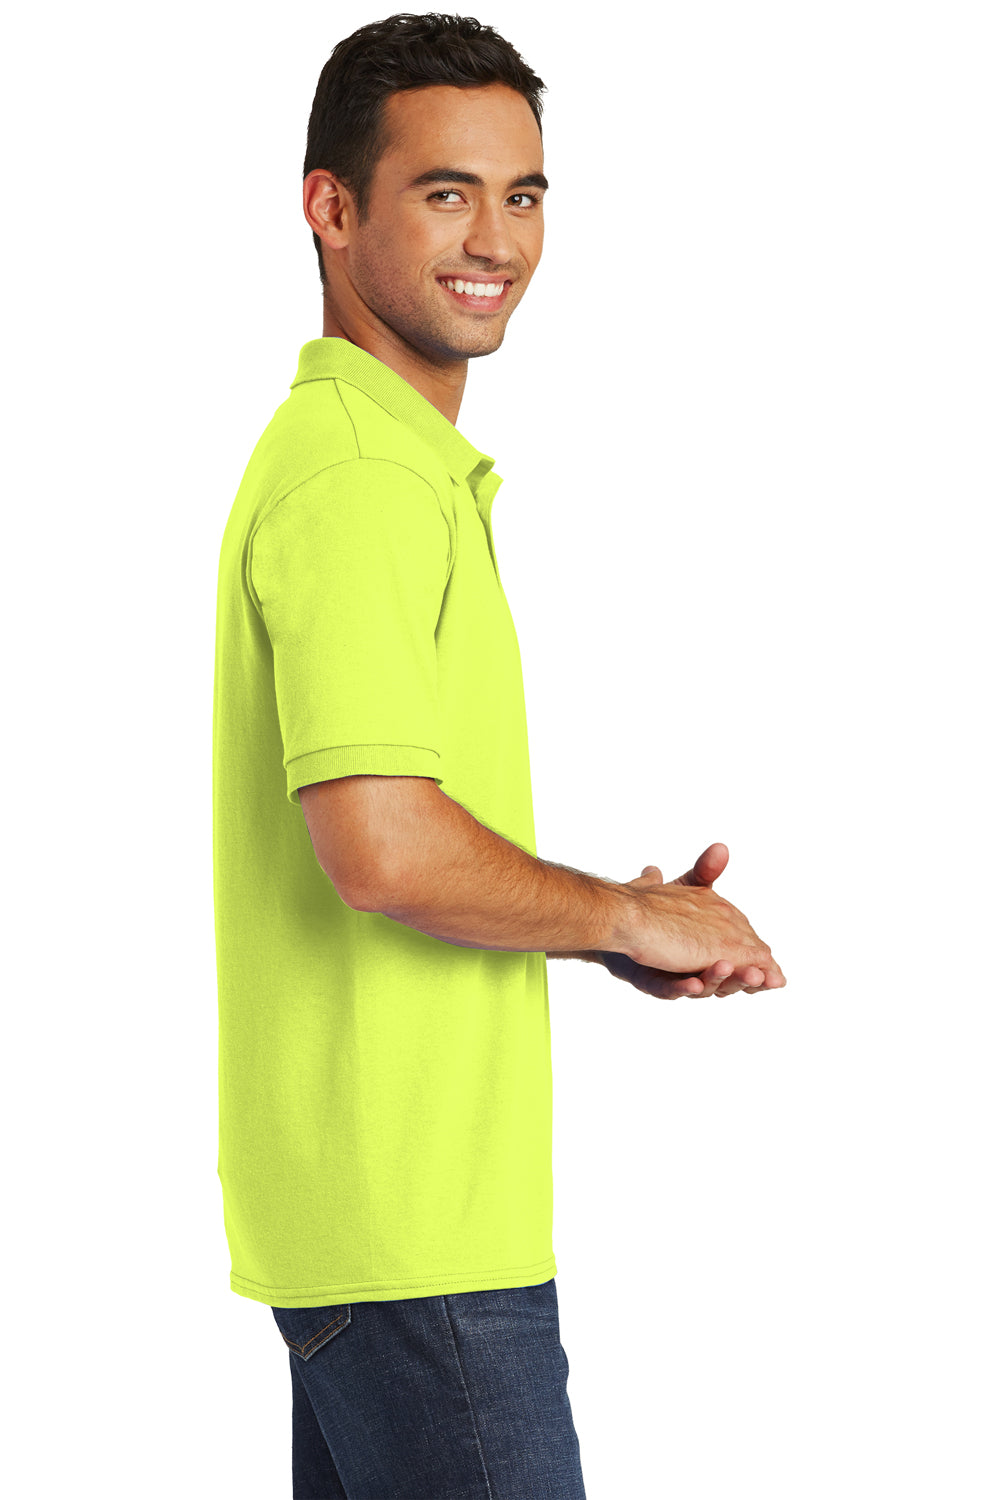 Port & Company KP55 Mens Core Stain Resistant Short Sleeve Polo Shirt Safety Green Side